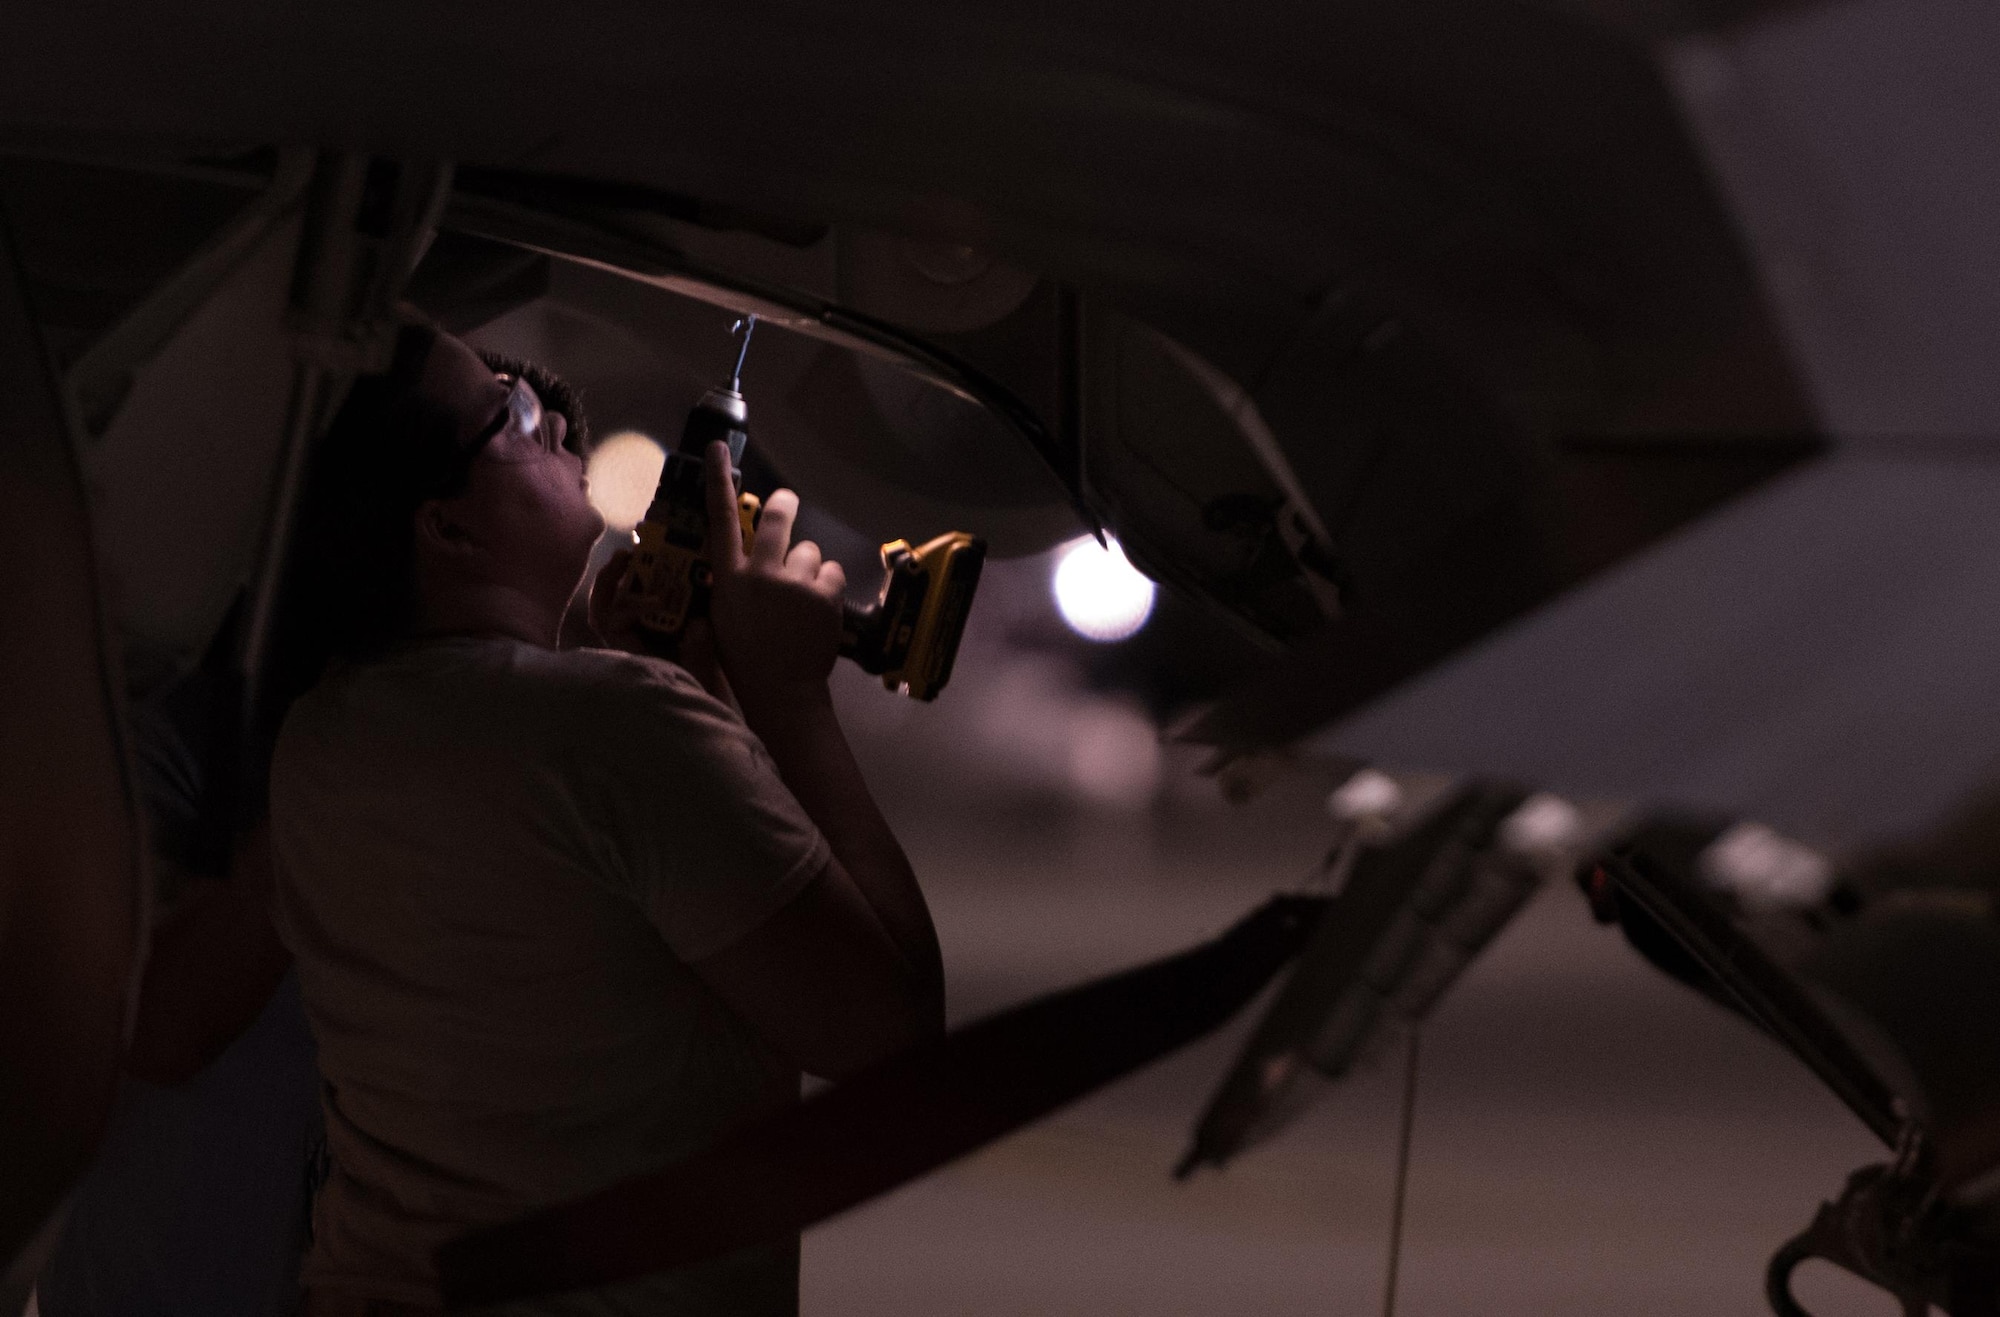 U.S. Air Force Staff Sgt. Deirdre Baker, 1st Maintenance Squadron, performs low-observable maintenance on an F-22 Raptor from the 94th Fighter Squadron at Nellis Air Force Base, Nev., Aug. 21, 2017.  The 94th FS is currently deployed to Red Flag 17-4, taking part in an multi-dimensional simulated air and ground combat environment. (U.S. Air Force photo by Staff Sgt. Carlin Leslie)